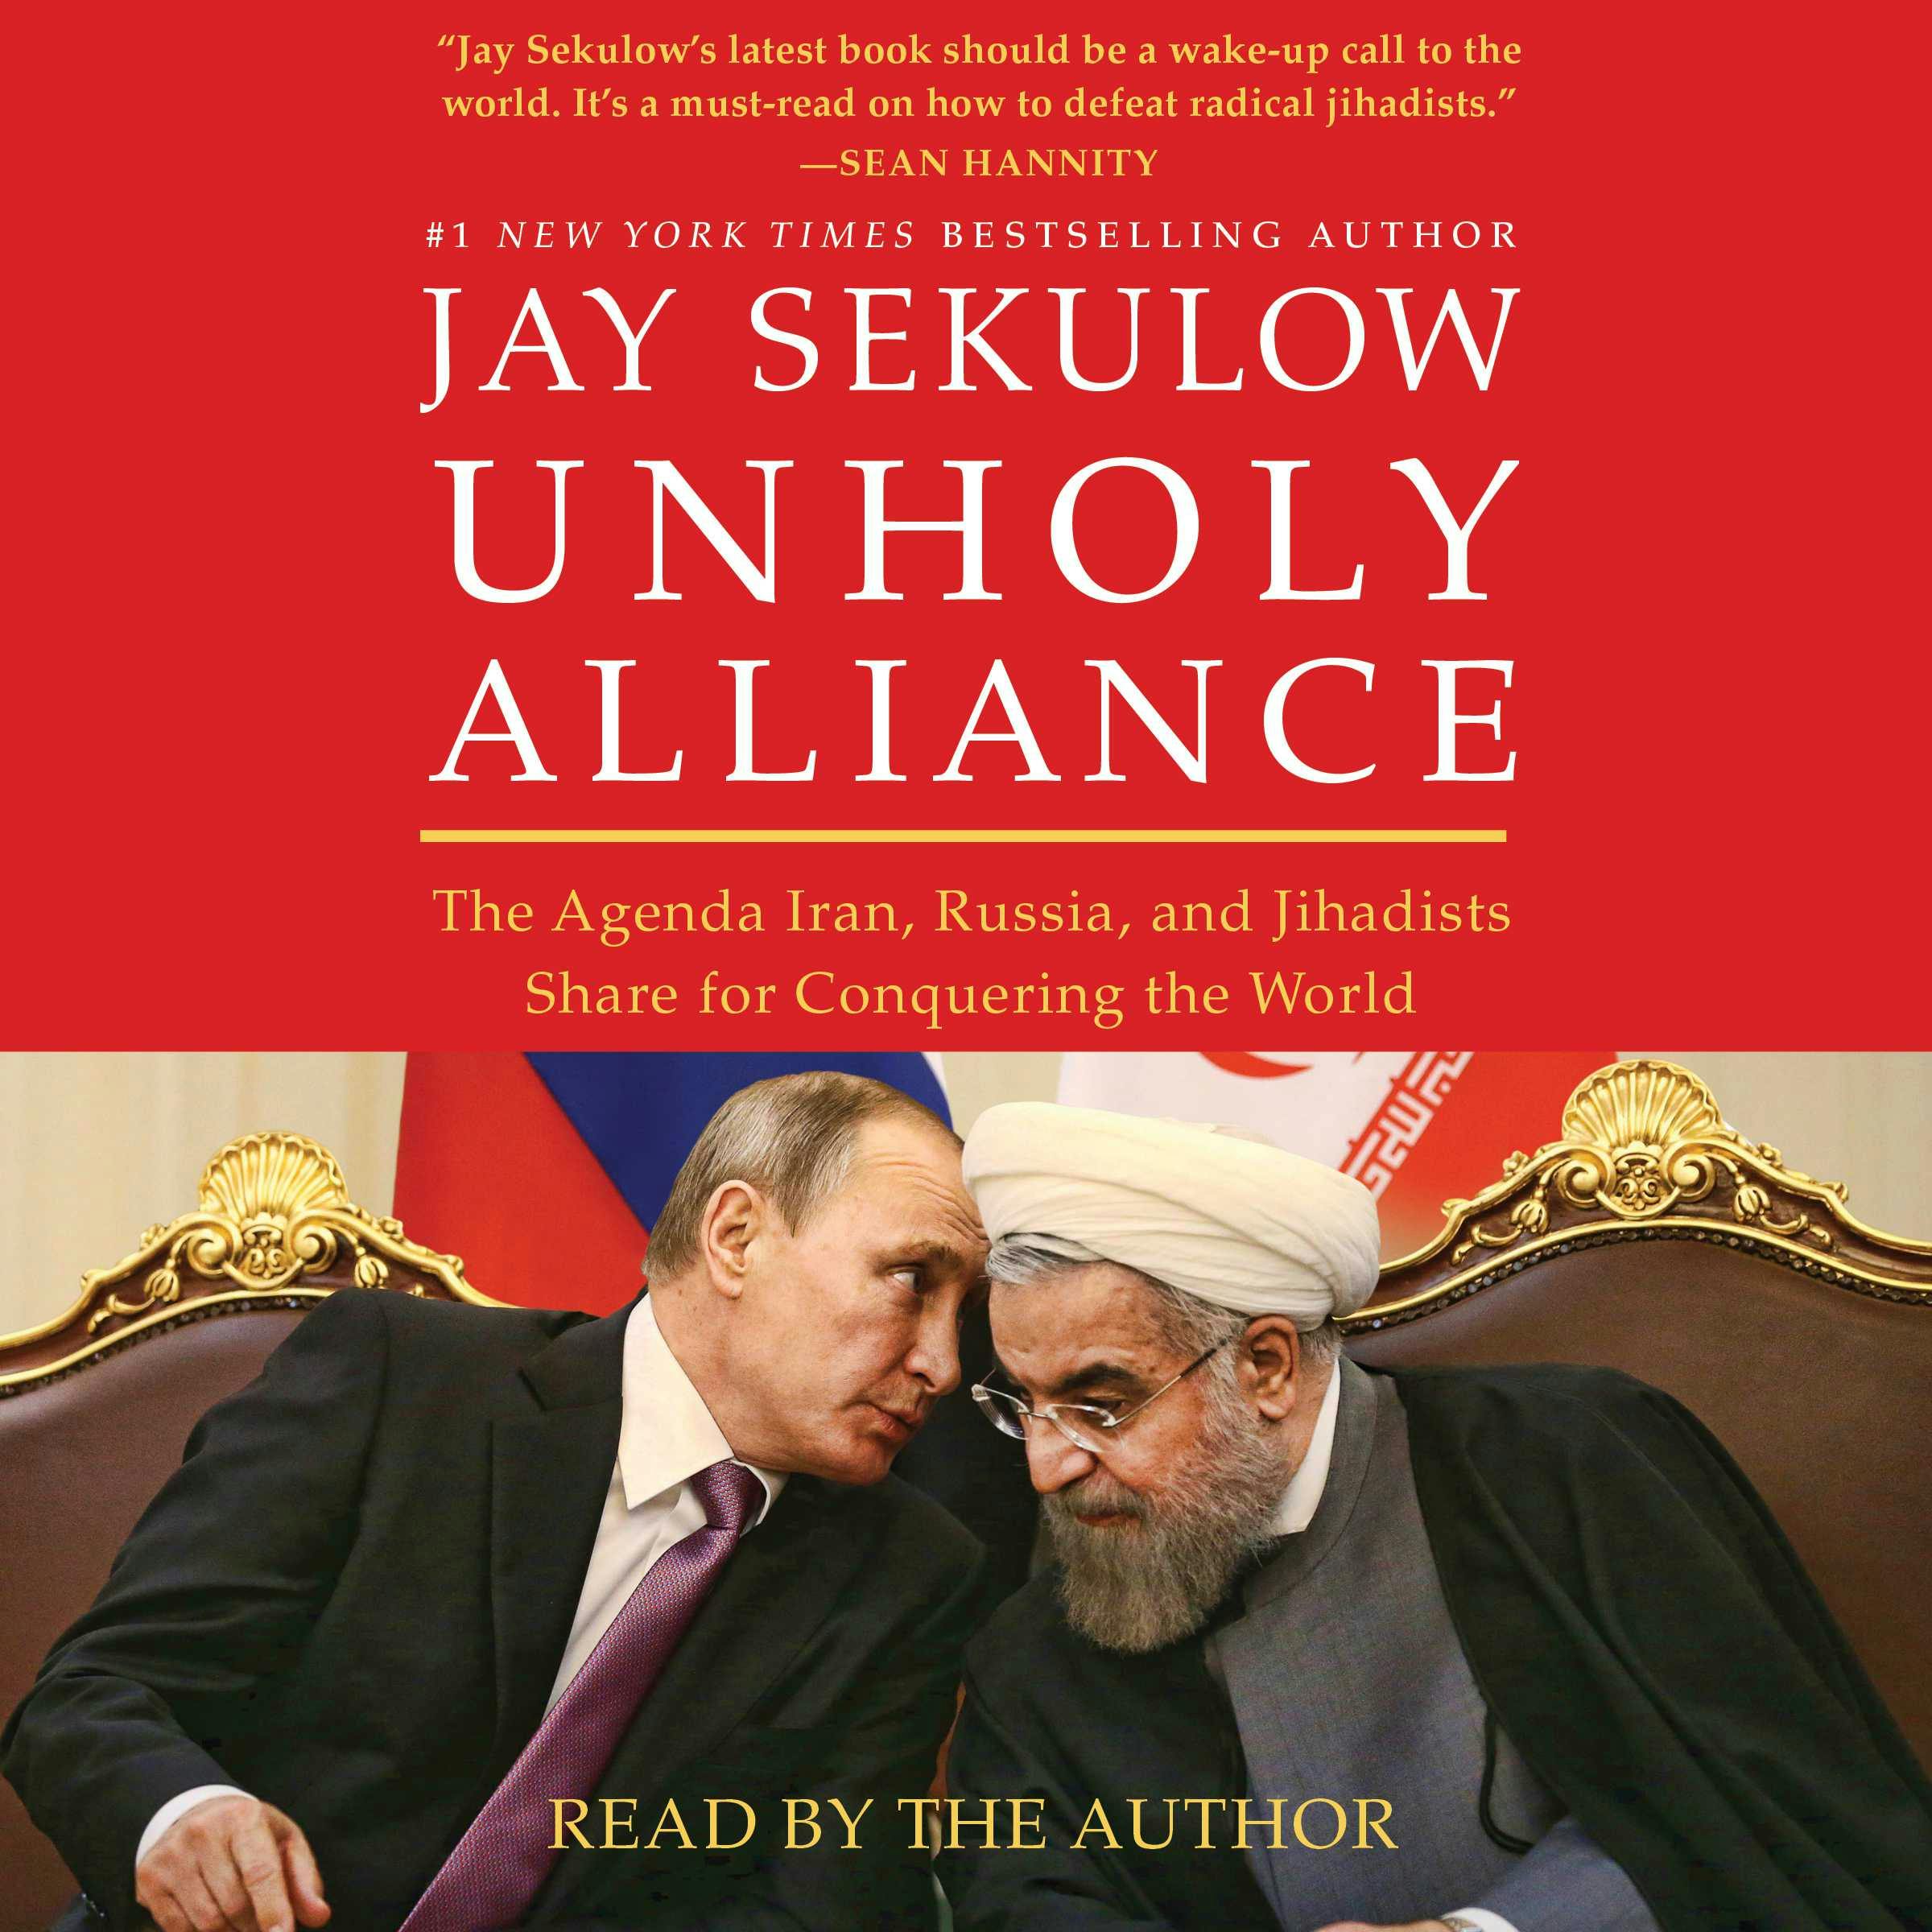 Unholy Alliance: The Agenda Iran, Russia, and Jihadists Share for Conquering the World - Jay Sekulow